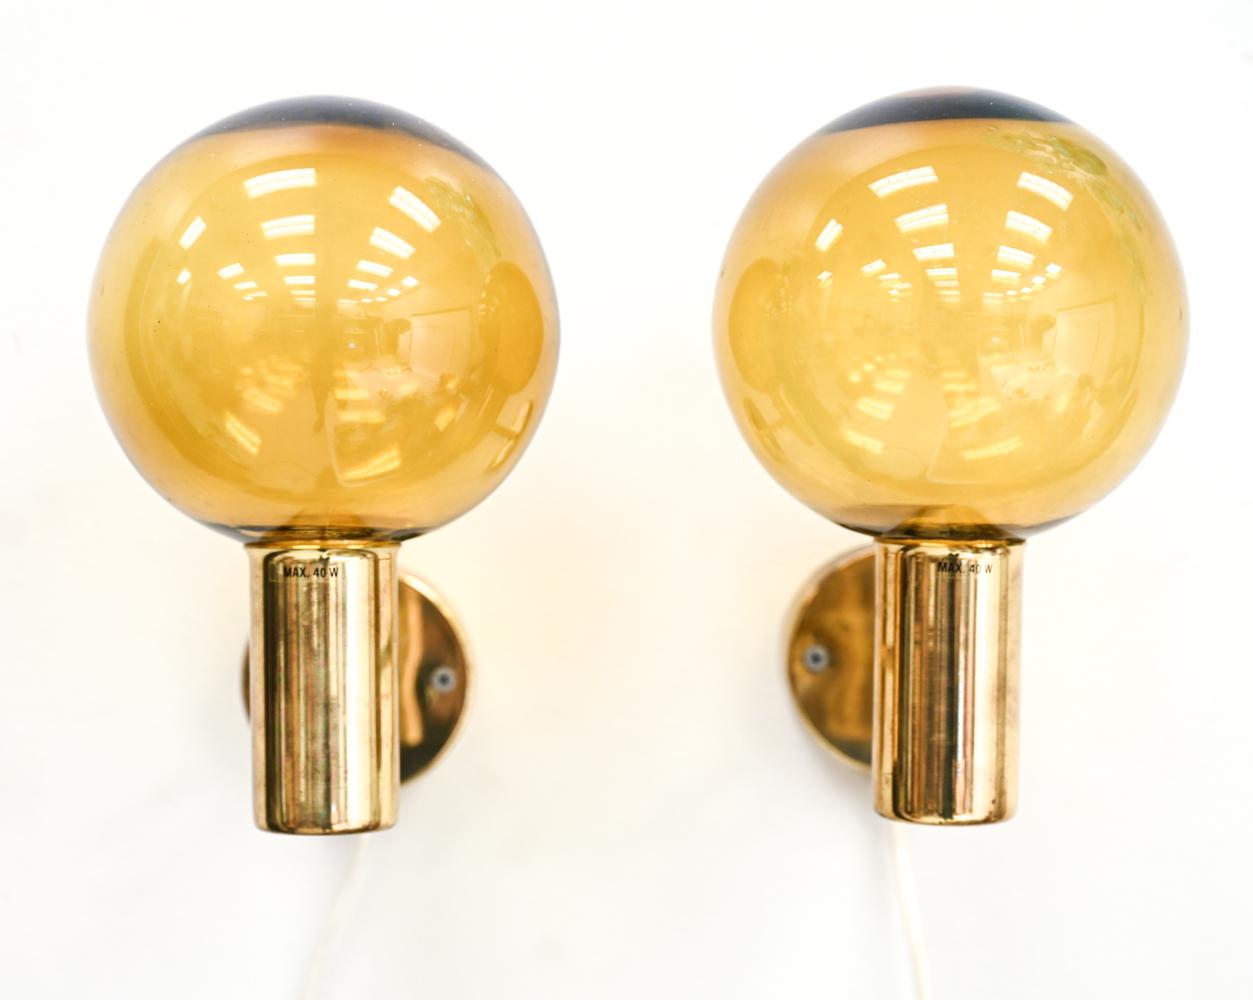 A pair of mid-century Scandinavian brass & glass electrified wall sconces designed by Hans-Agne Jakobsson for Markaryd (Sweden, 1960s). Polished brass with hand-blown amber glass spherical globe shades. Model V-149. With 